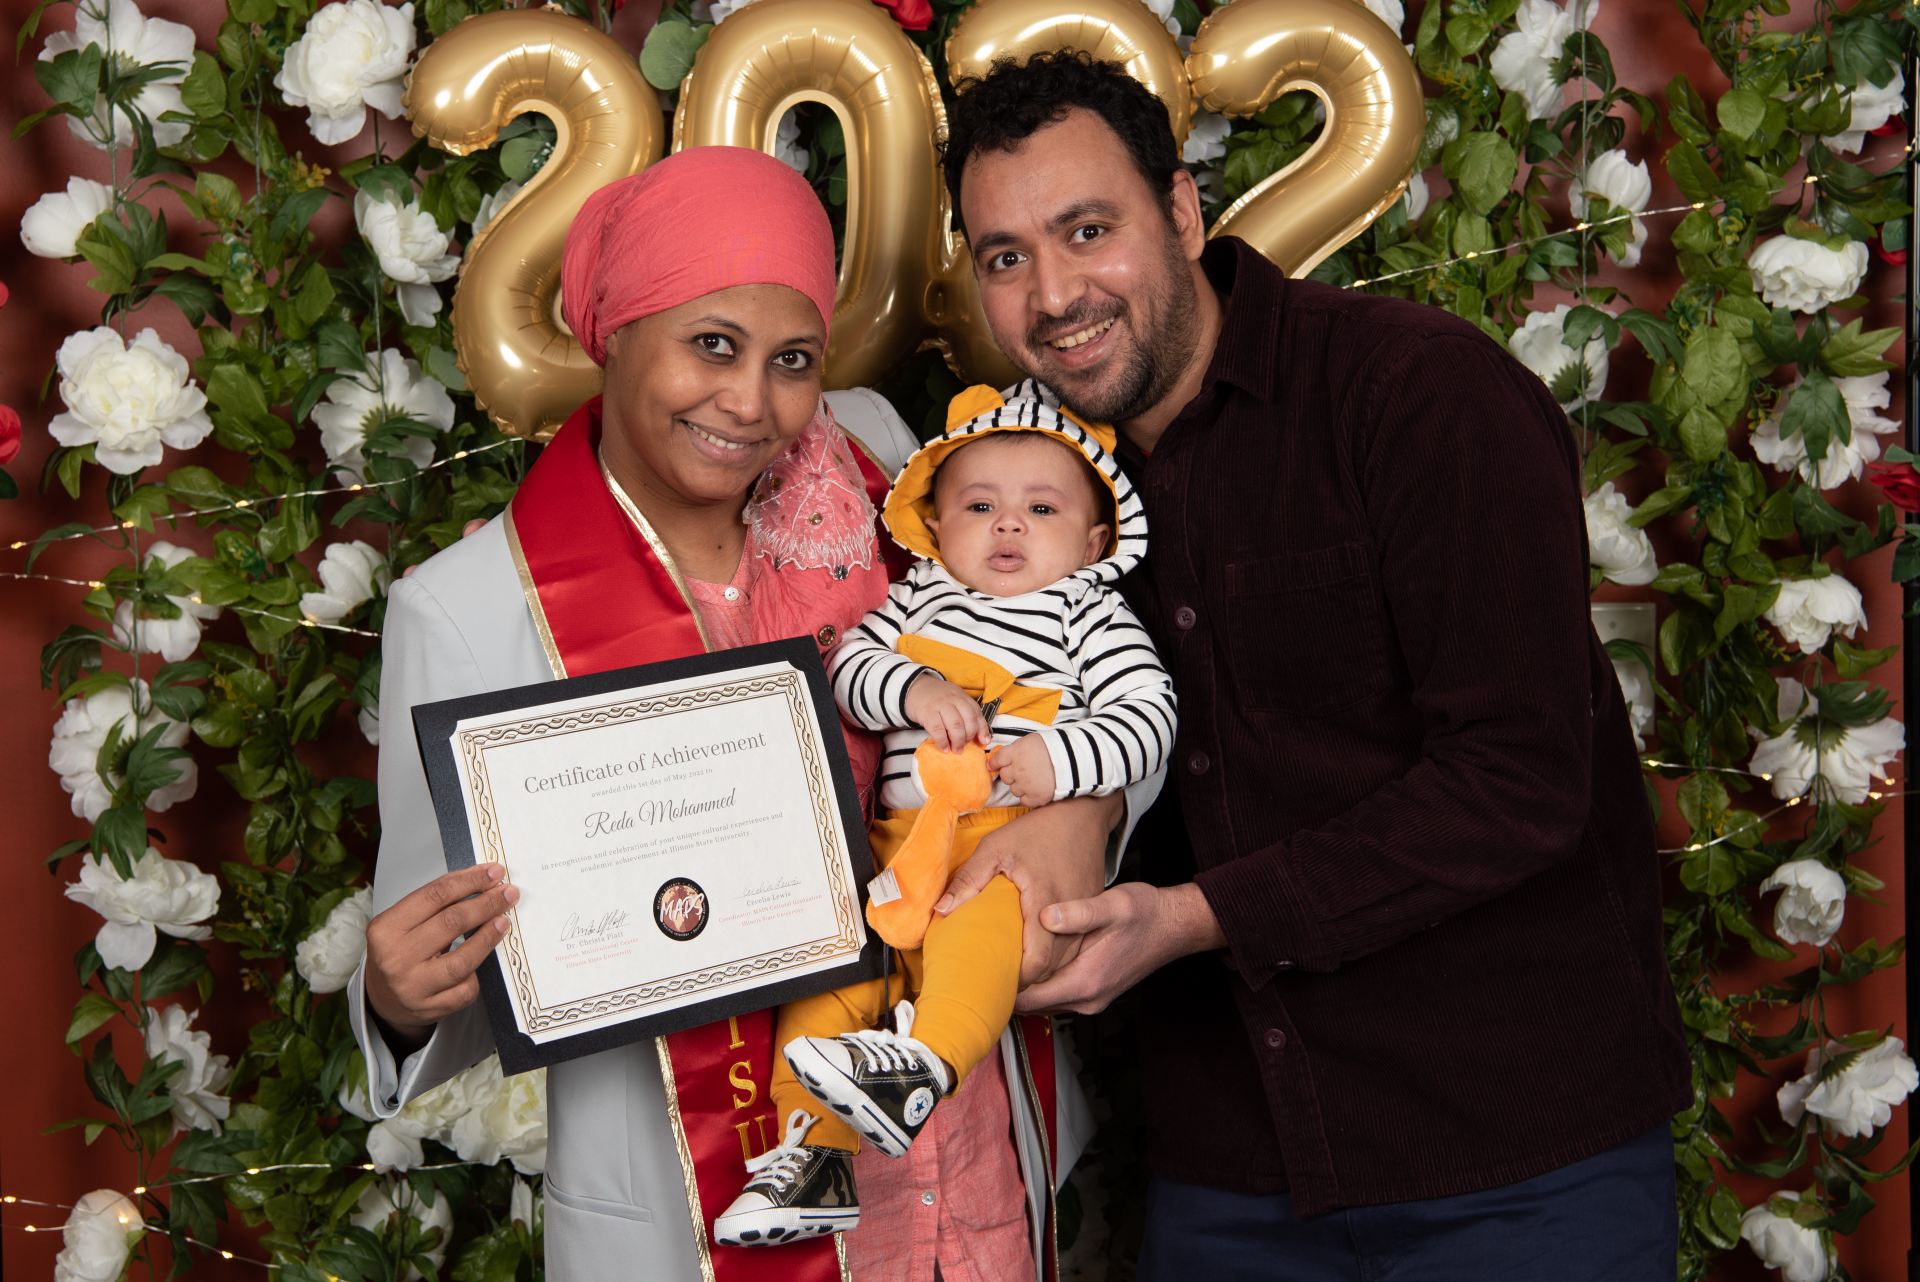 A student graduate posing with a baby and another person.